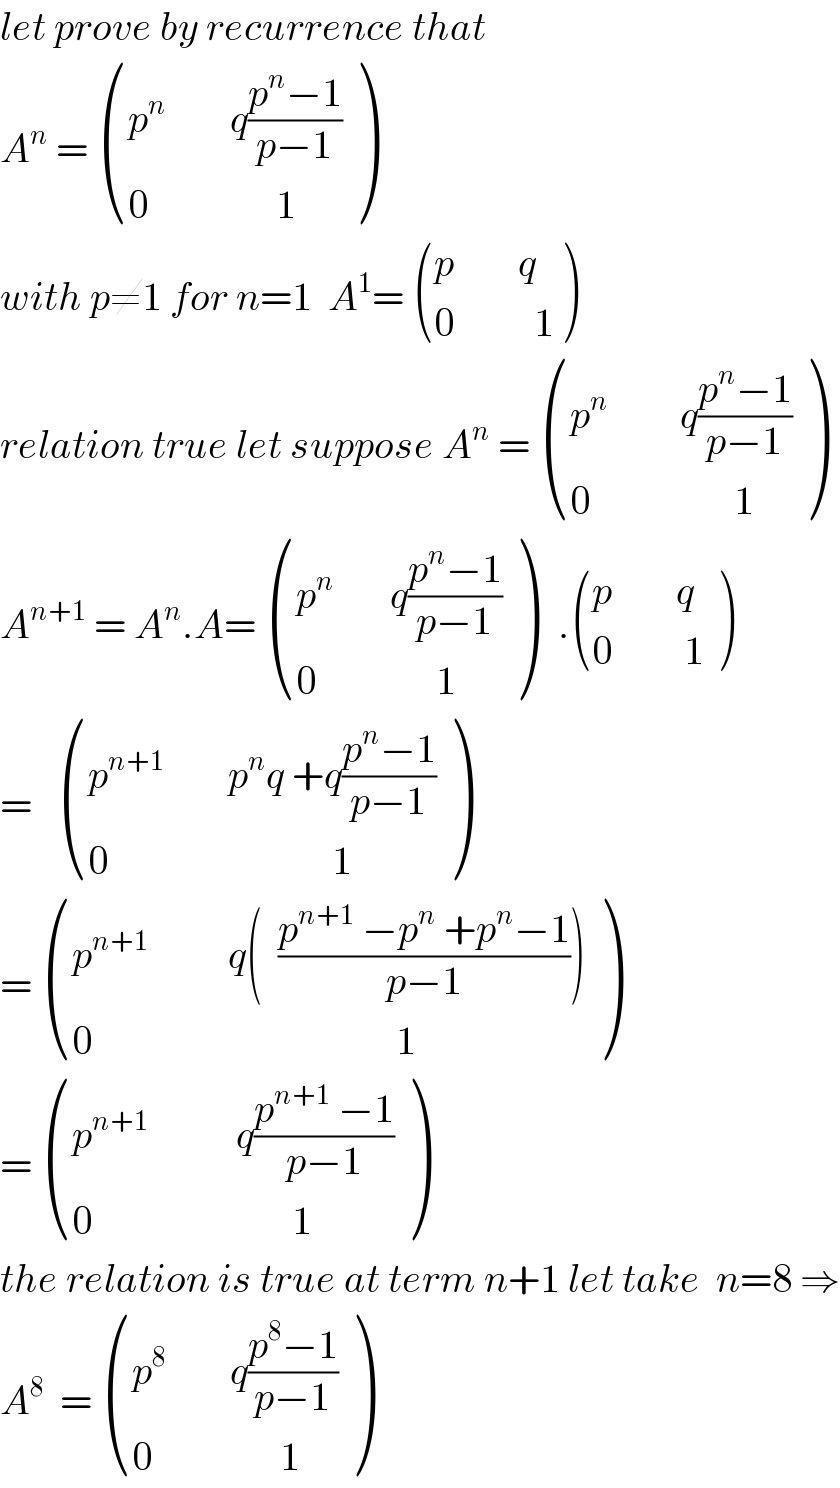 let prove by recurrence that   A^n  =  (((p^n         q((p^n −1)/(p−1)))),((0                1)) )  with p≠1 for n=1  A^1 =  (((p        q)),((0          1)) )  relation true let suppose A^n  =  (((p^n          q((p^n −1)/(p−1)))),((0                  1)) )  A^(n+1)  = A^n .A=  (((p^n        q((p^n −1)/(p−1)))),((0               1)) )   . (((p        q  )),((0         1)) )  =    (((p^(n+1)         p^n q +q((p^n −1)/(p−1)))),((0                            1)) )  =  (((p^(n+1)           q(  ((p^(n+1)  −p^n  +p^n −1)/(p−1))))),((0                                      1)) )  =  (((p^(n+1)            q((p^(n+1)  −1)/(p−1)))),((0                         1)) )  the relation is true at term n+1 let take  n=8 ⇒  A^8   =  (((p^8         q((p^8 −1)/(p−1)))),((0                1)) )  